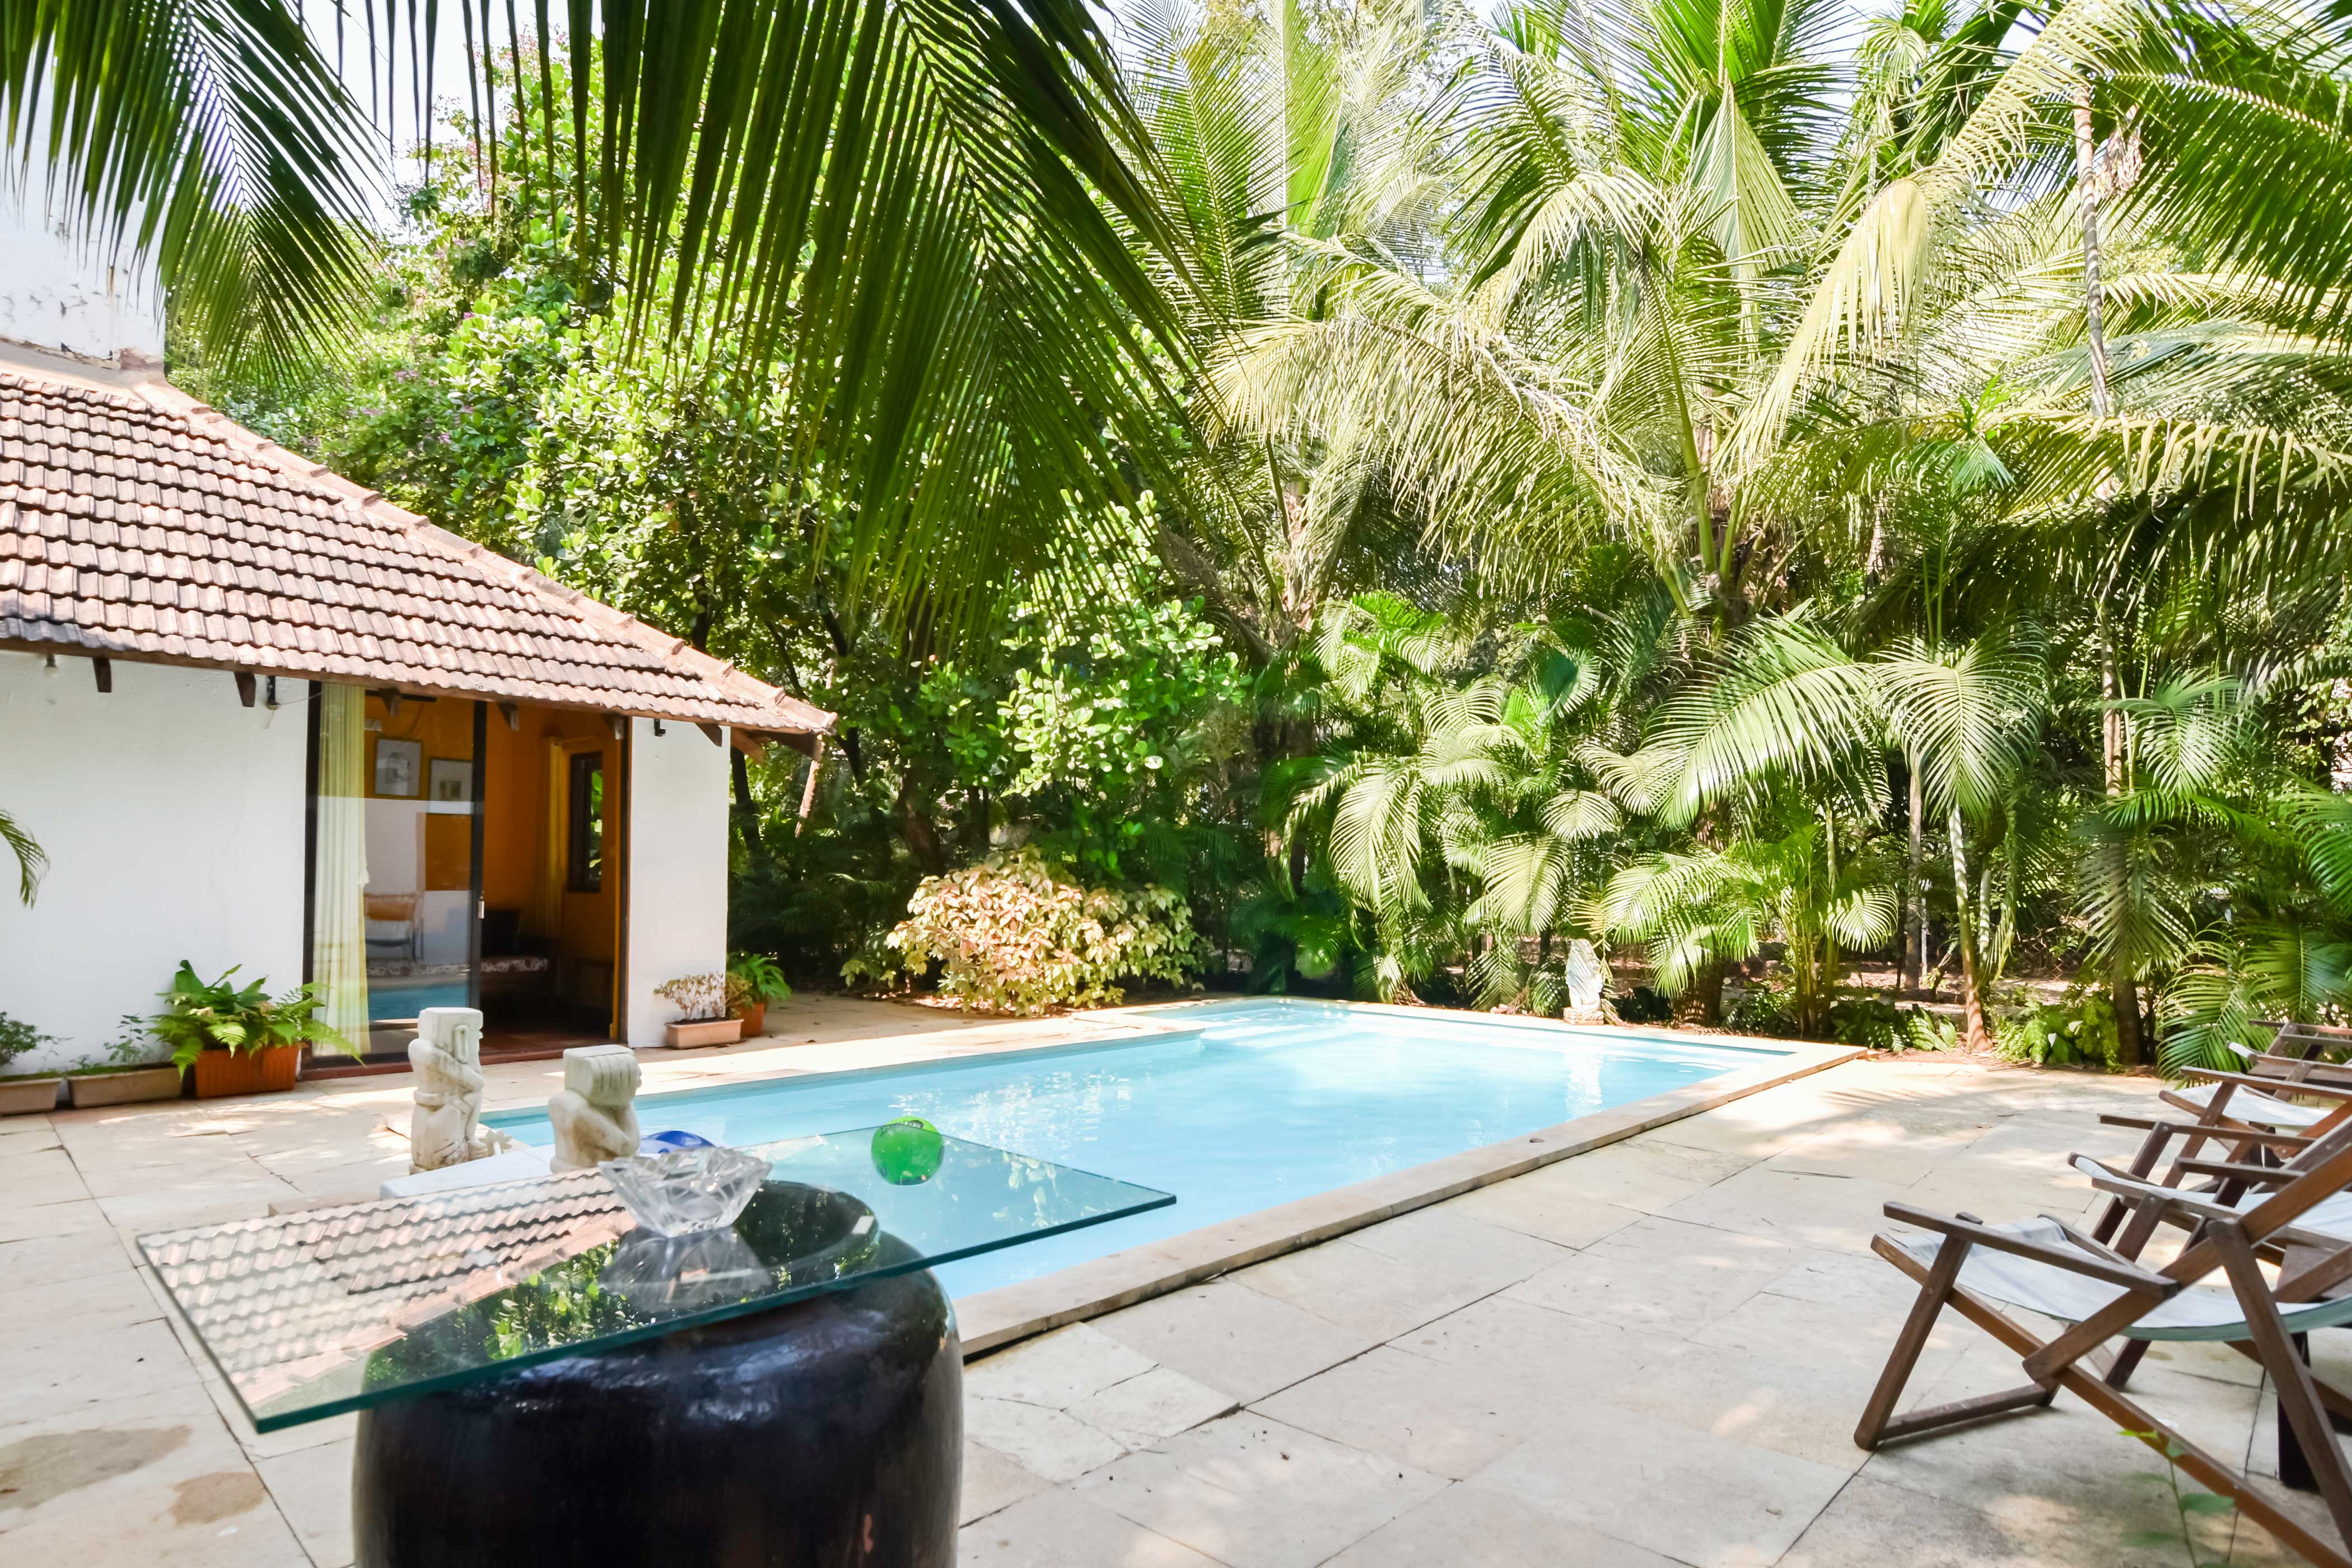 2bhk Boutique Villa With Pool By Alibag Beach Villas For Rent In Kihim Maharashtra India